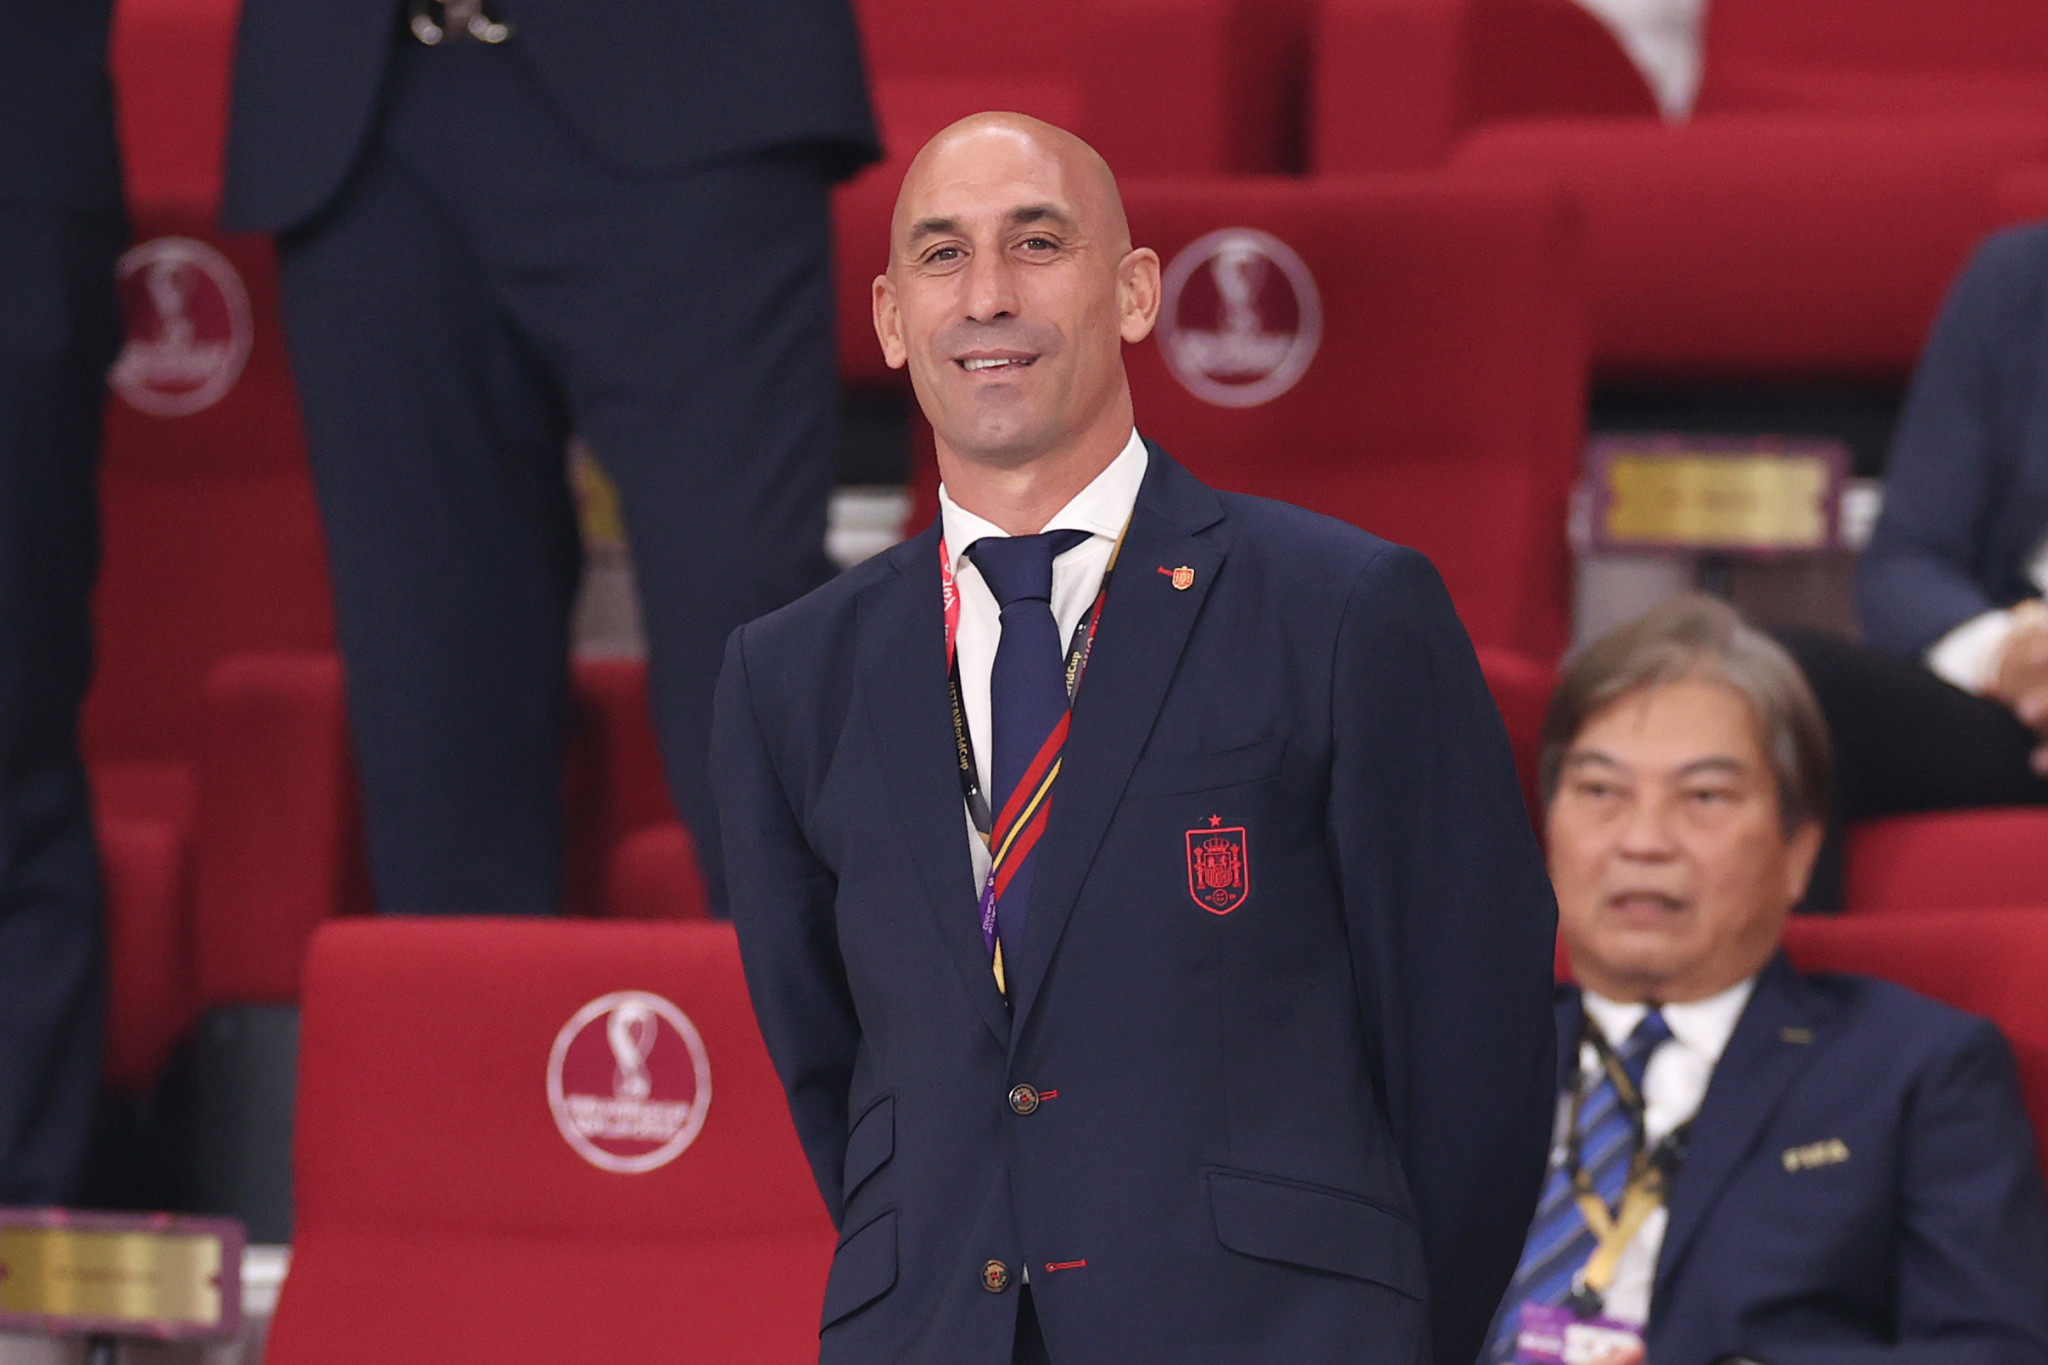 FIFA opens disciplinary proceedings against RFEF President Rubiales